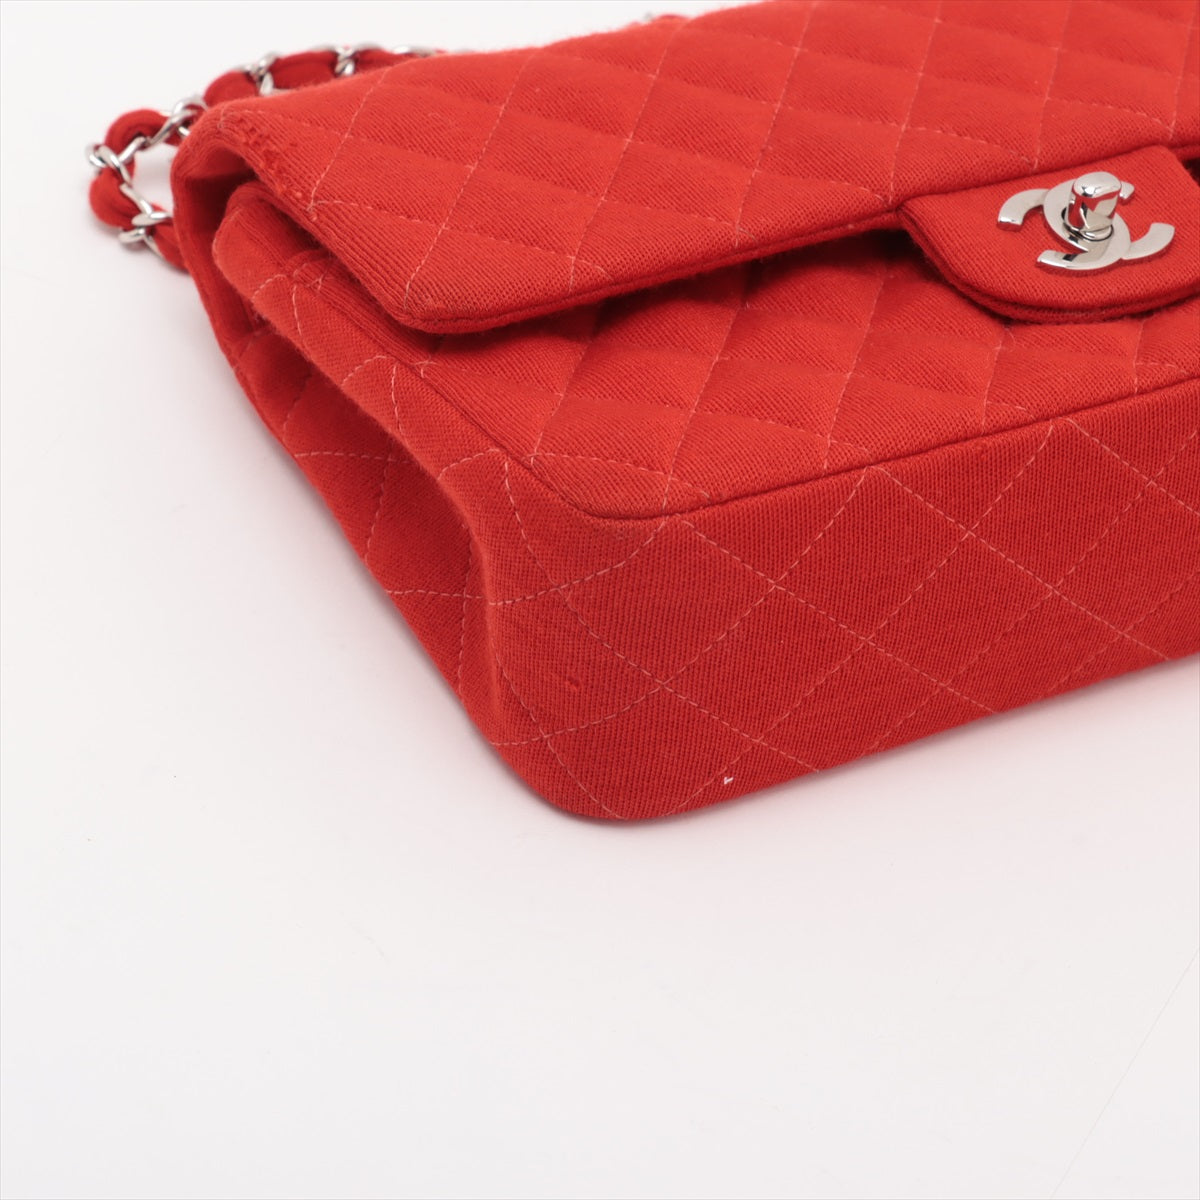 Chanel Matelasse 25 Cotton Double Flap Double Chain Bag Red Silver Metal Fittings 5XXXXXX A01112